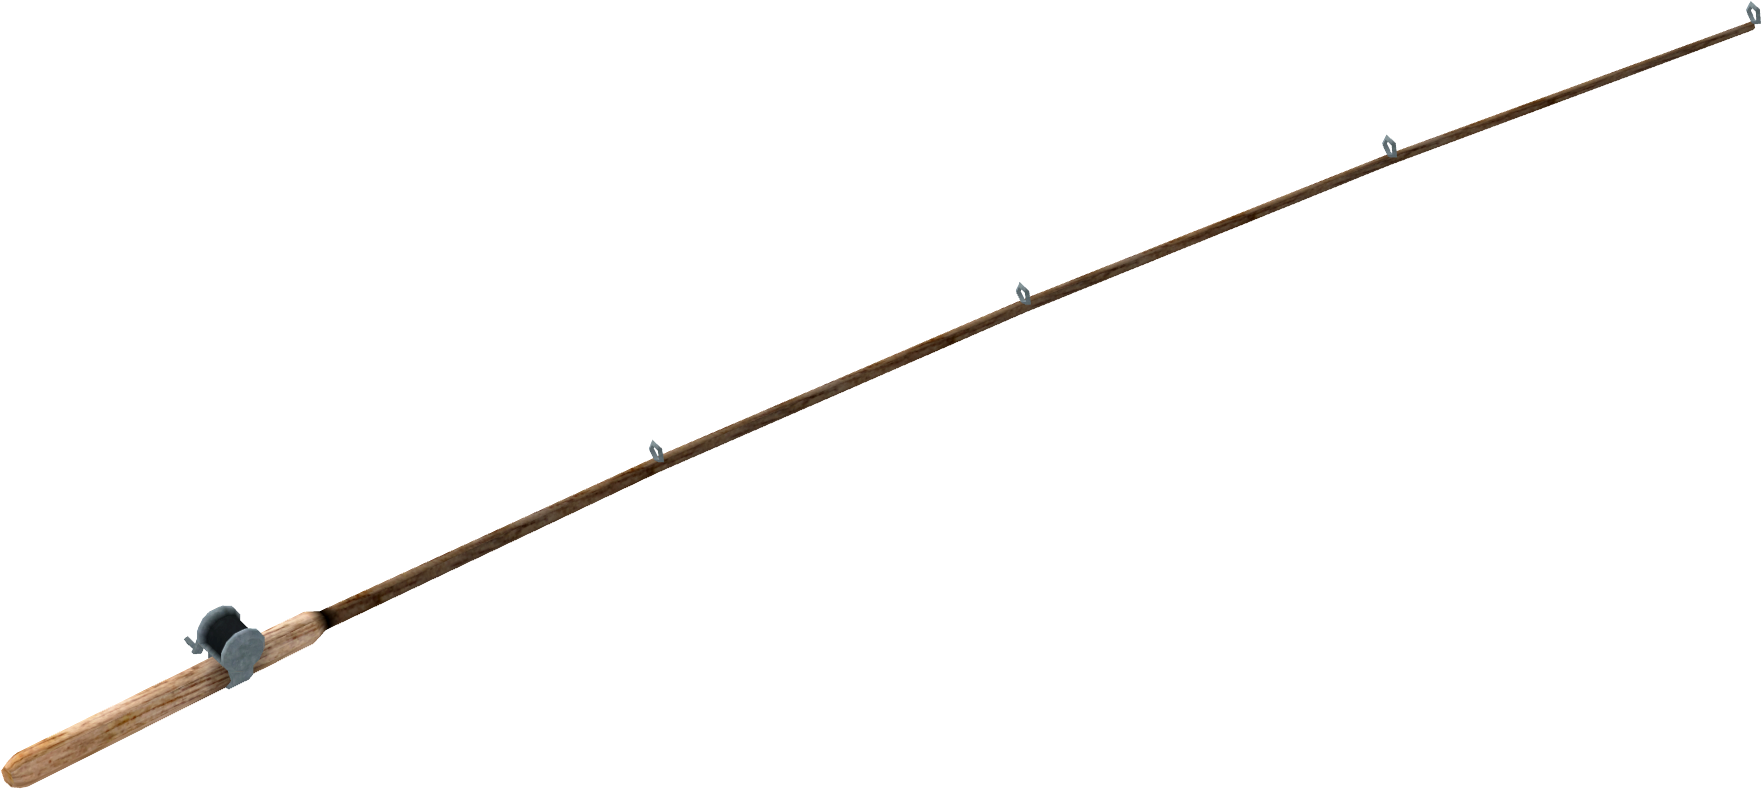 Fishing Pole Png Image - Gopal Pathak All Backgrounds (1830x831)